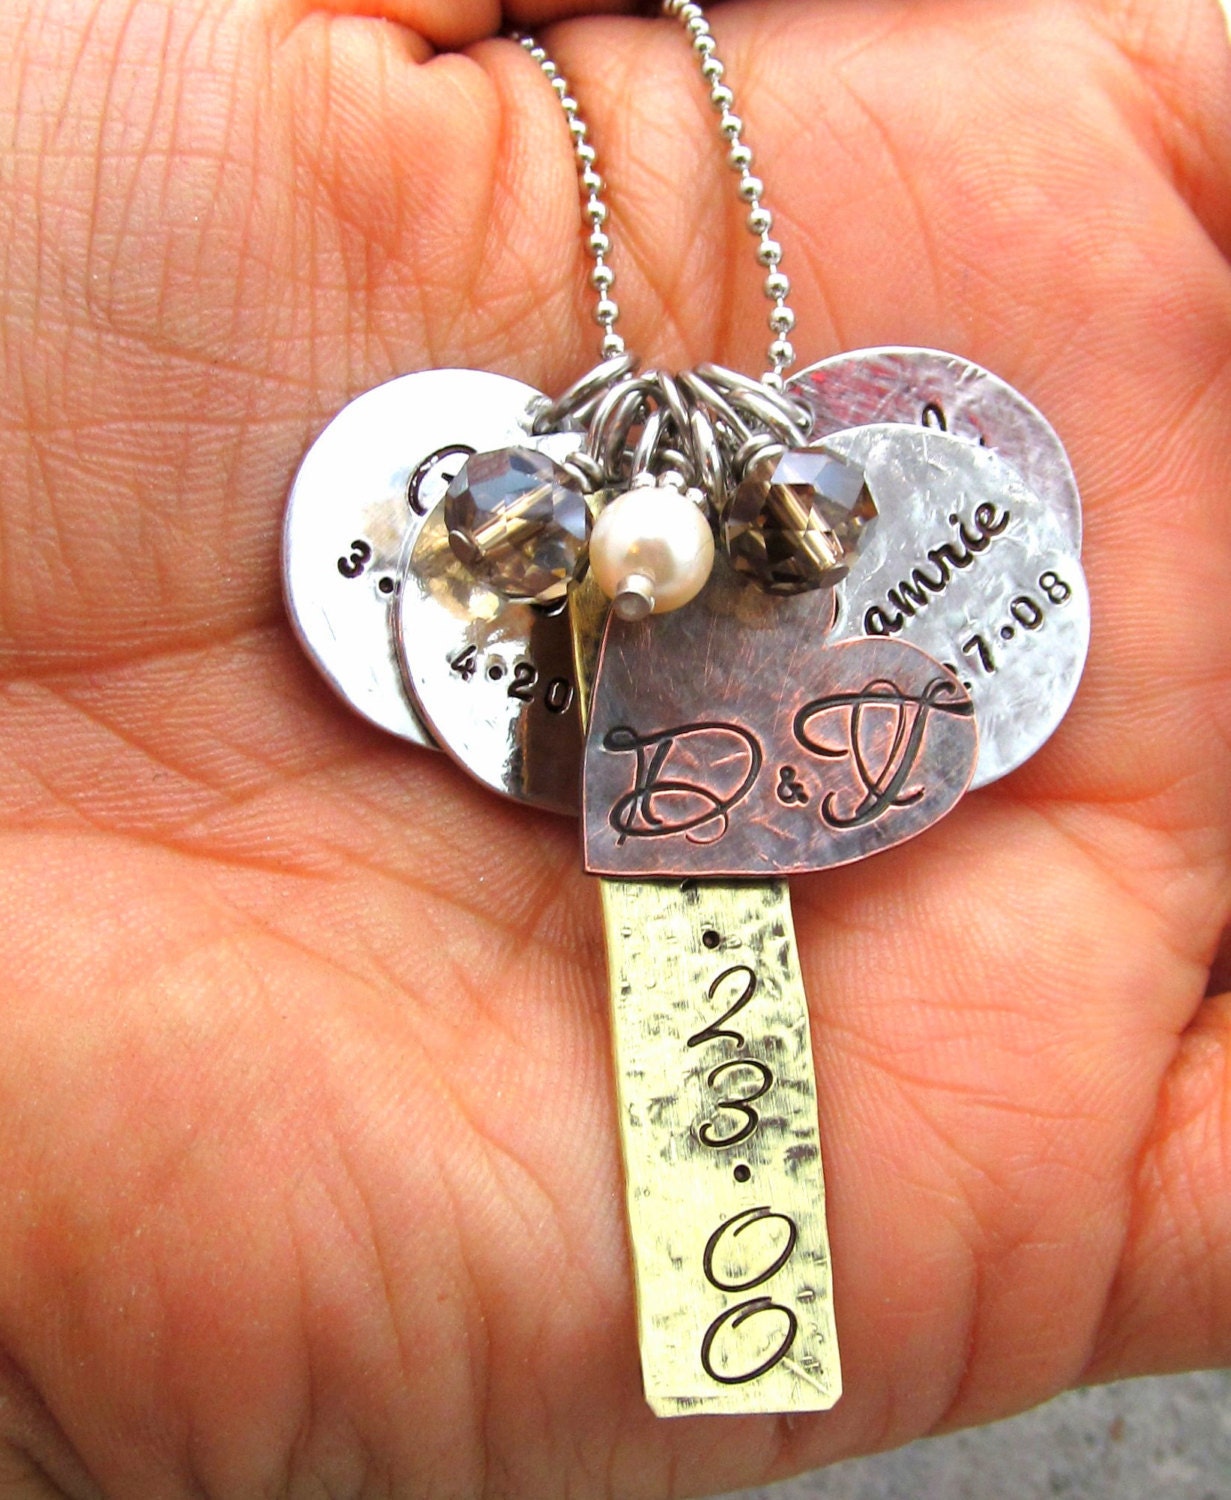 Personalized Necklace Hand Stamped Jewelry Mixed Metal